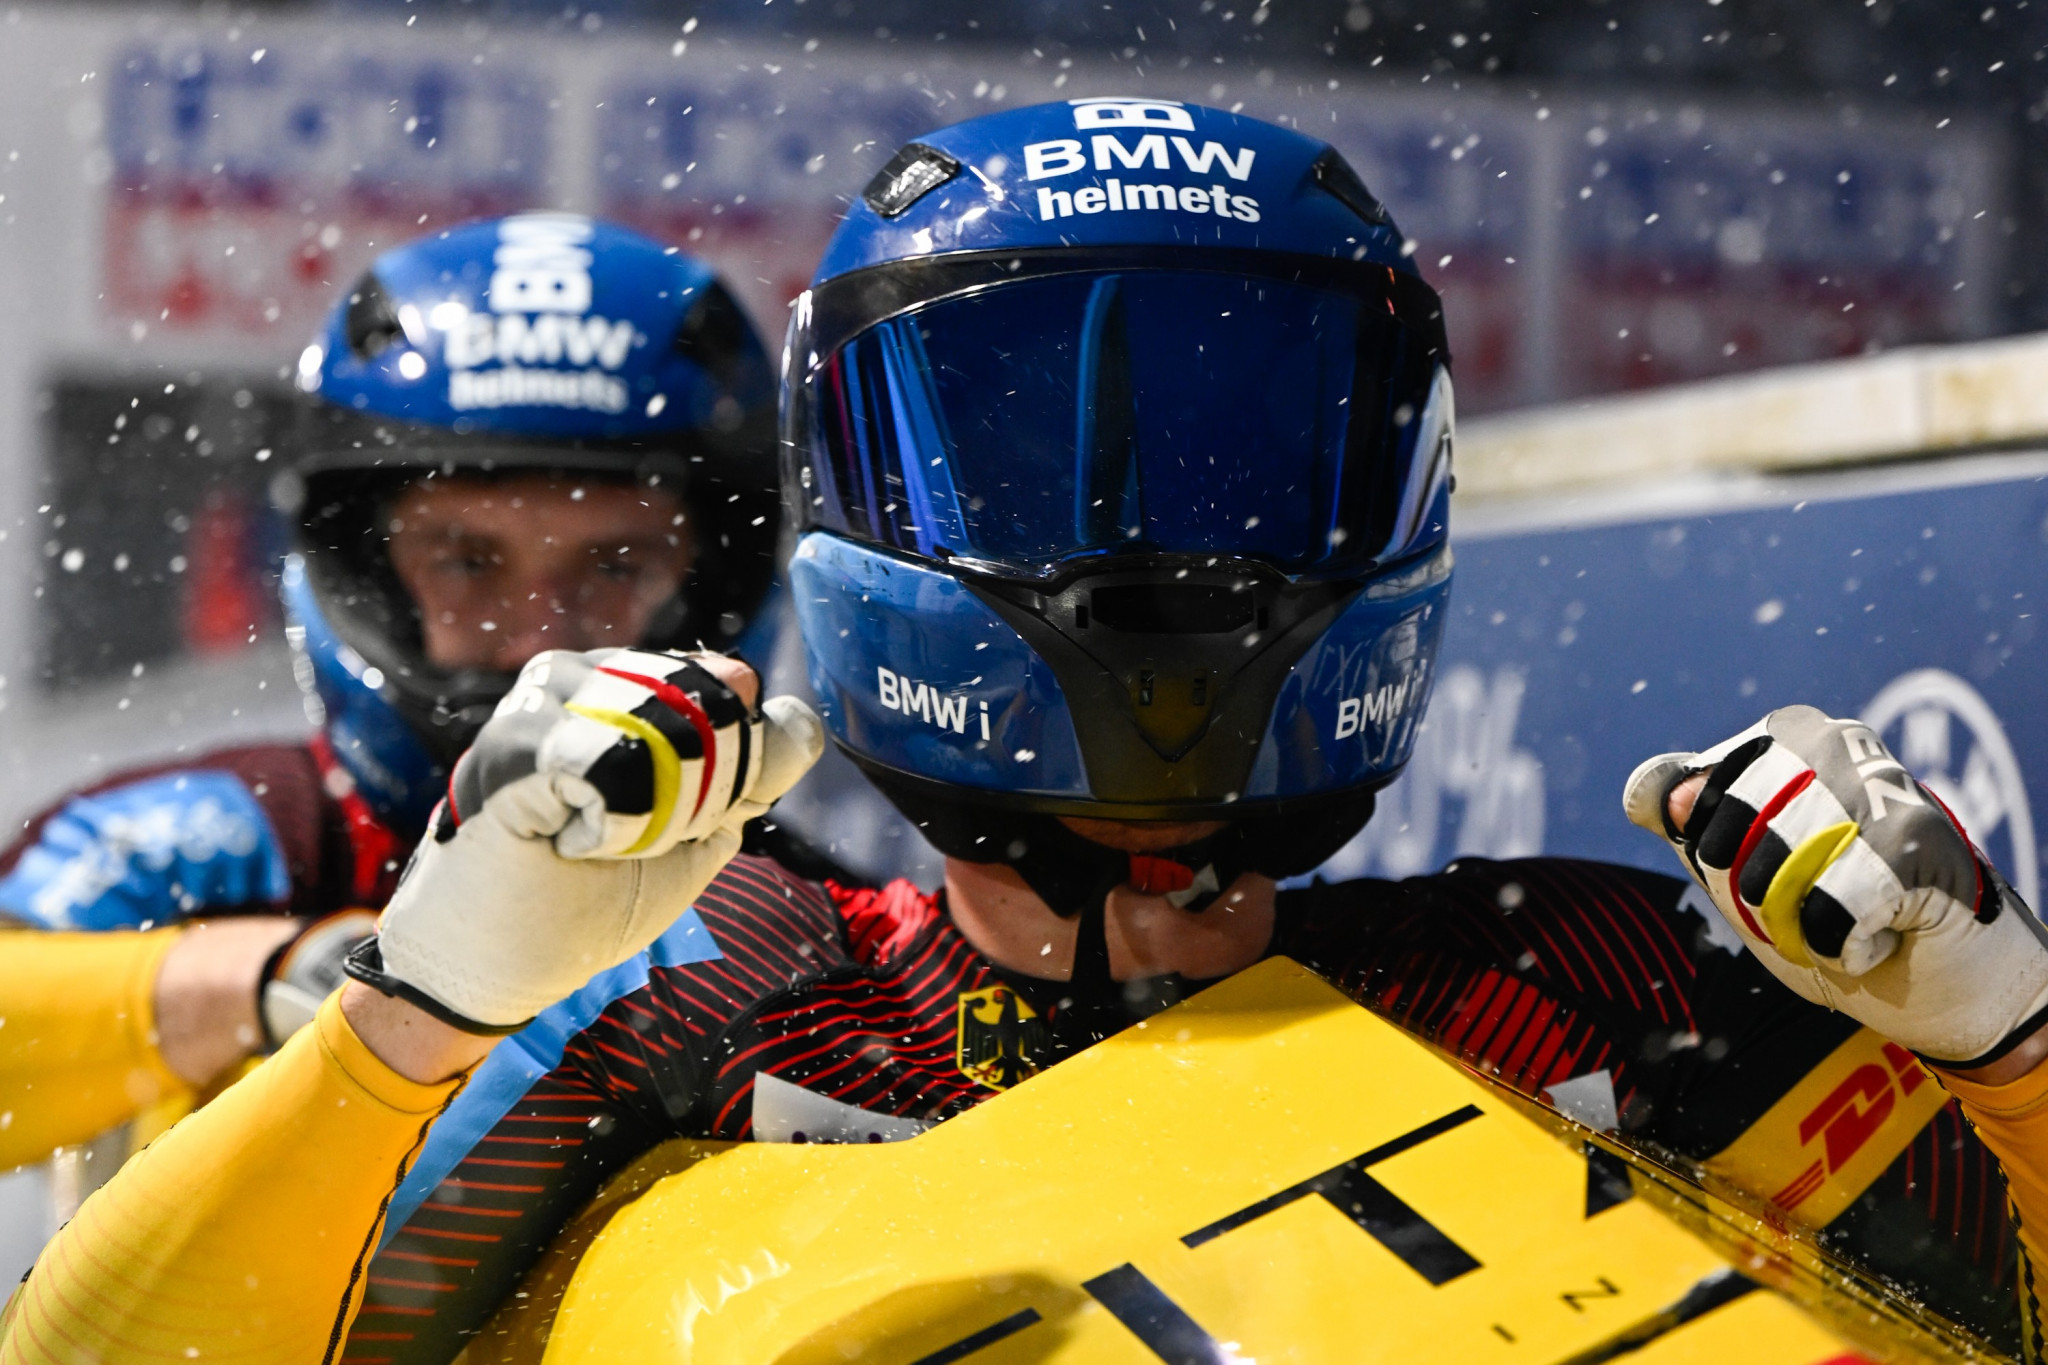 Johannes Lochner, front, and Erec Bruckert, back, helped Germany to win gold at the IBSF World Cup and European Championships in the two-man bobsleigh ©IBSF